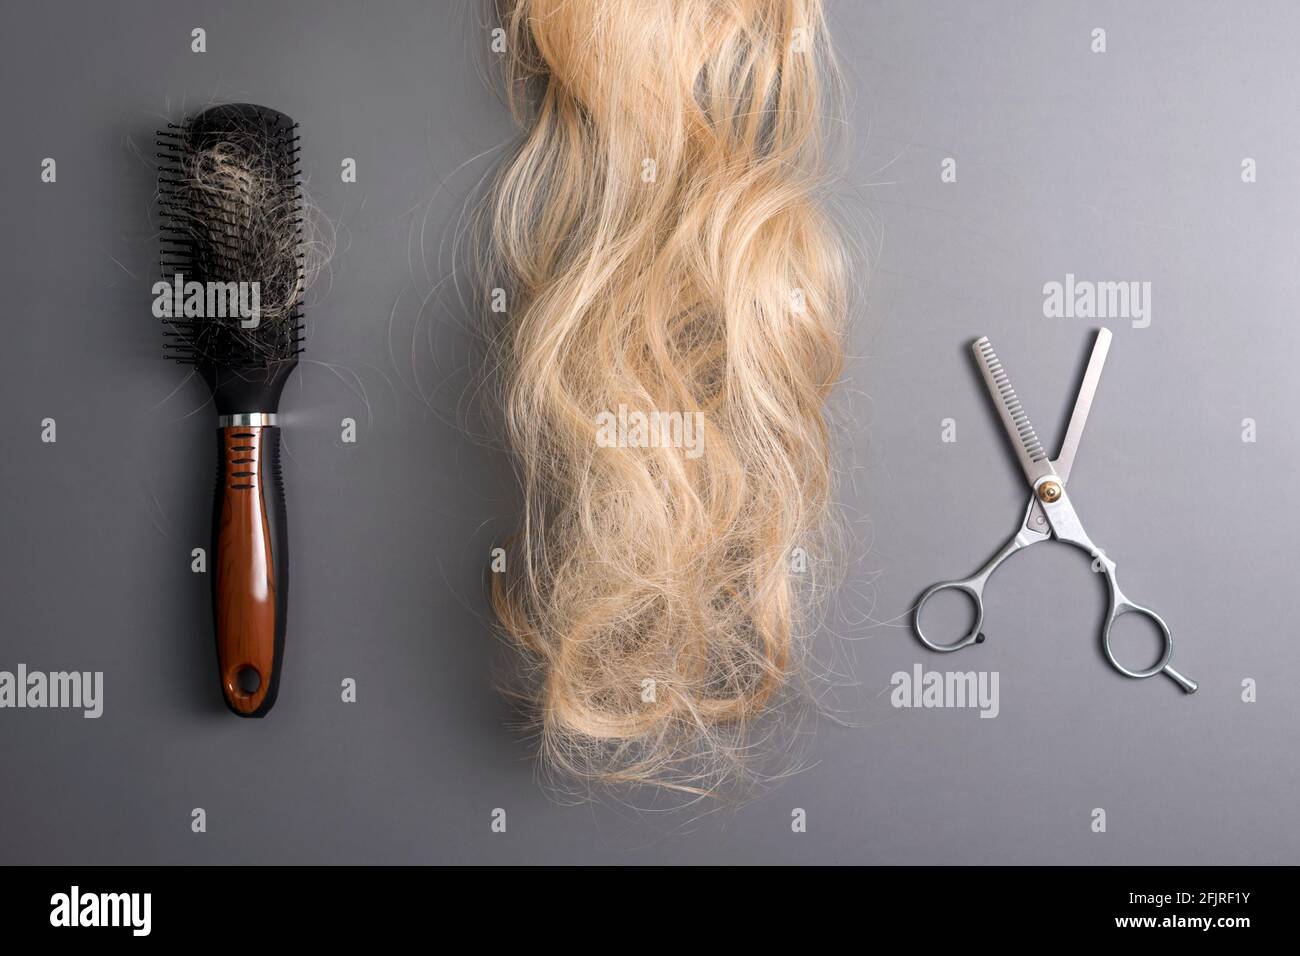 Hairdresser professional thinning scissors or shears and hairbrush with matted curl of blonde hair on grey background. Beauty salon. Hair extensions a Stock Photo